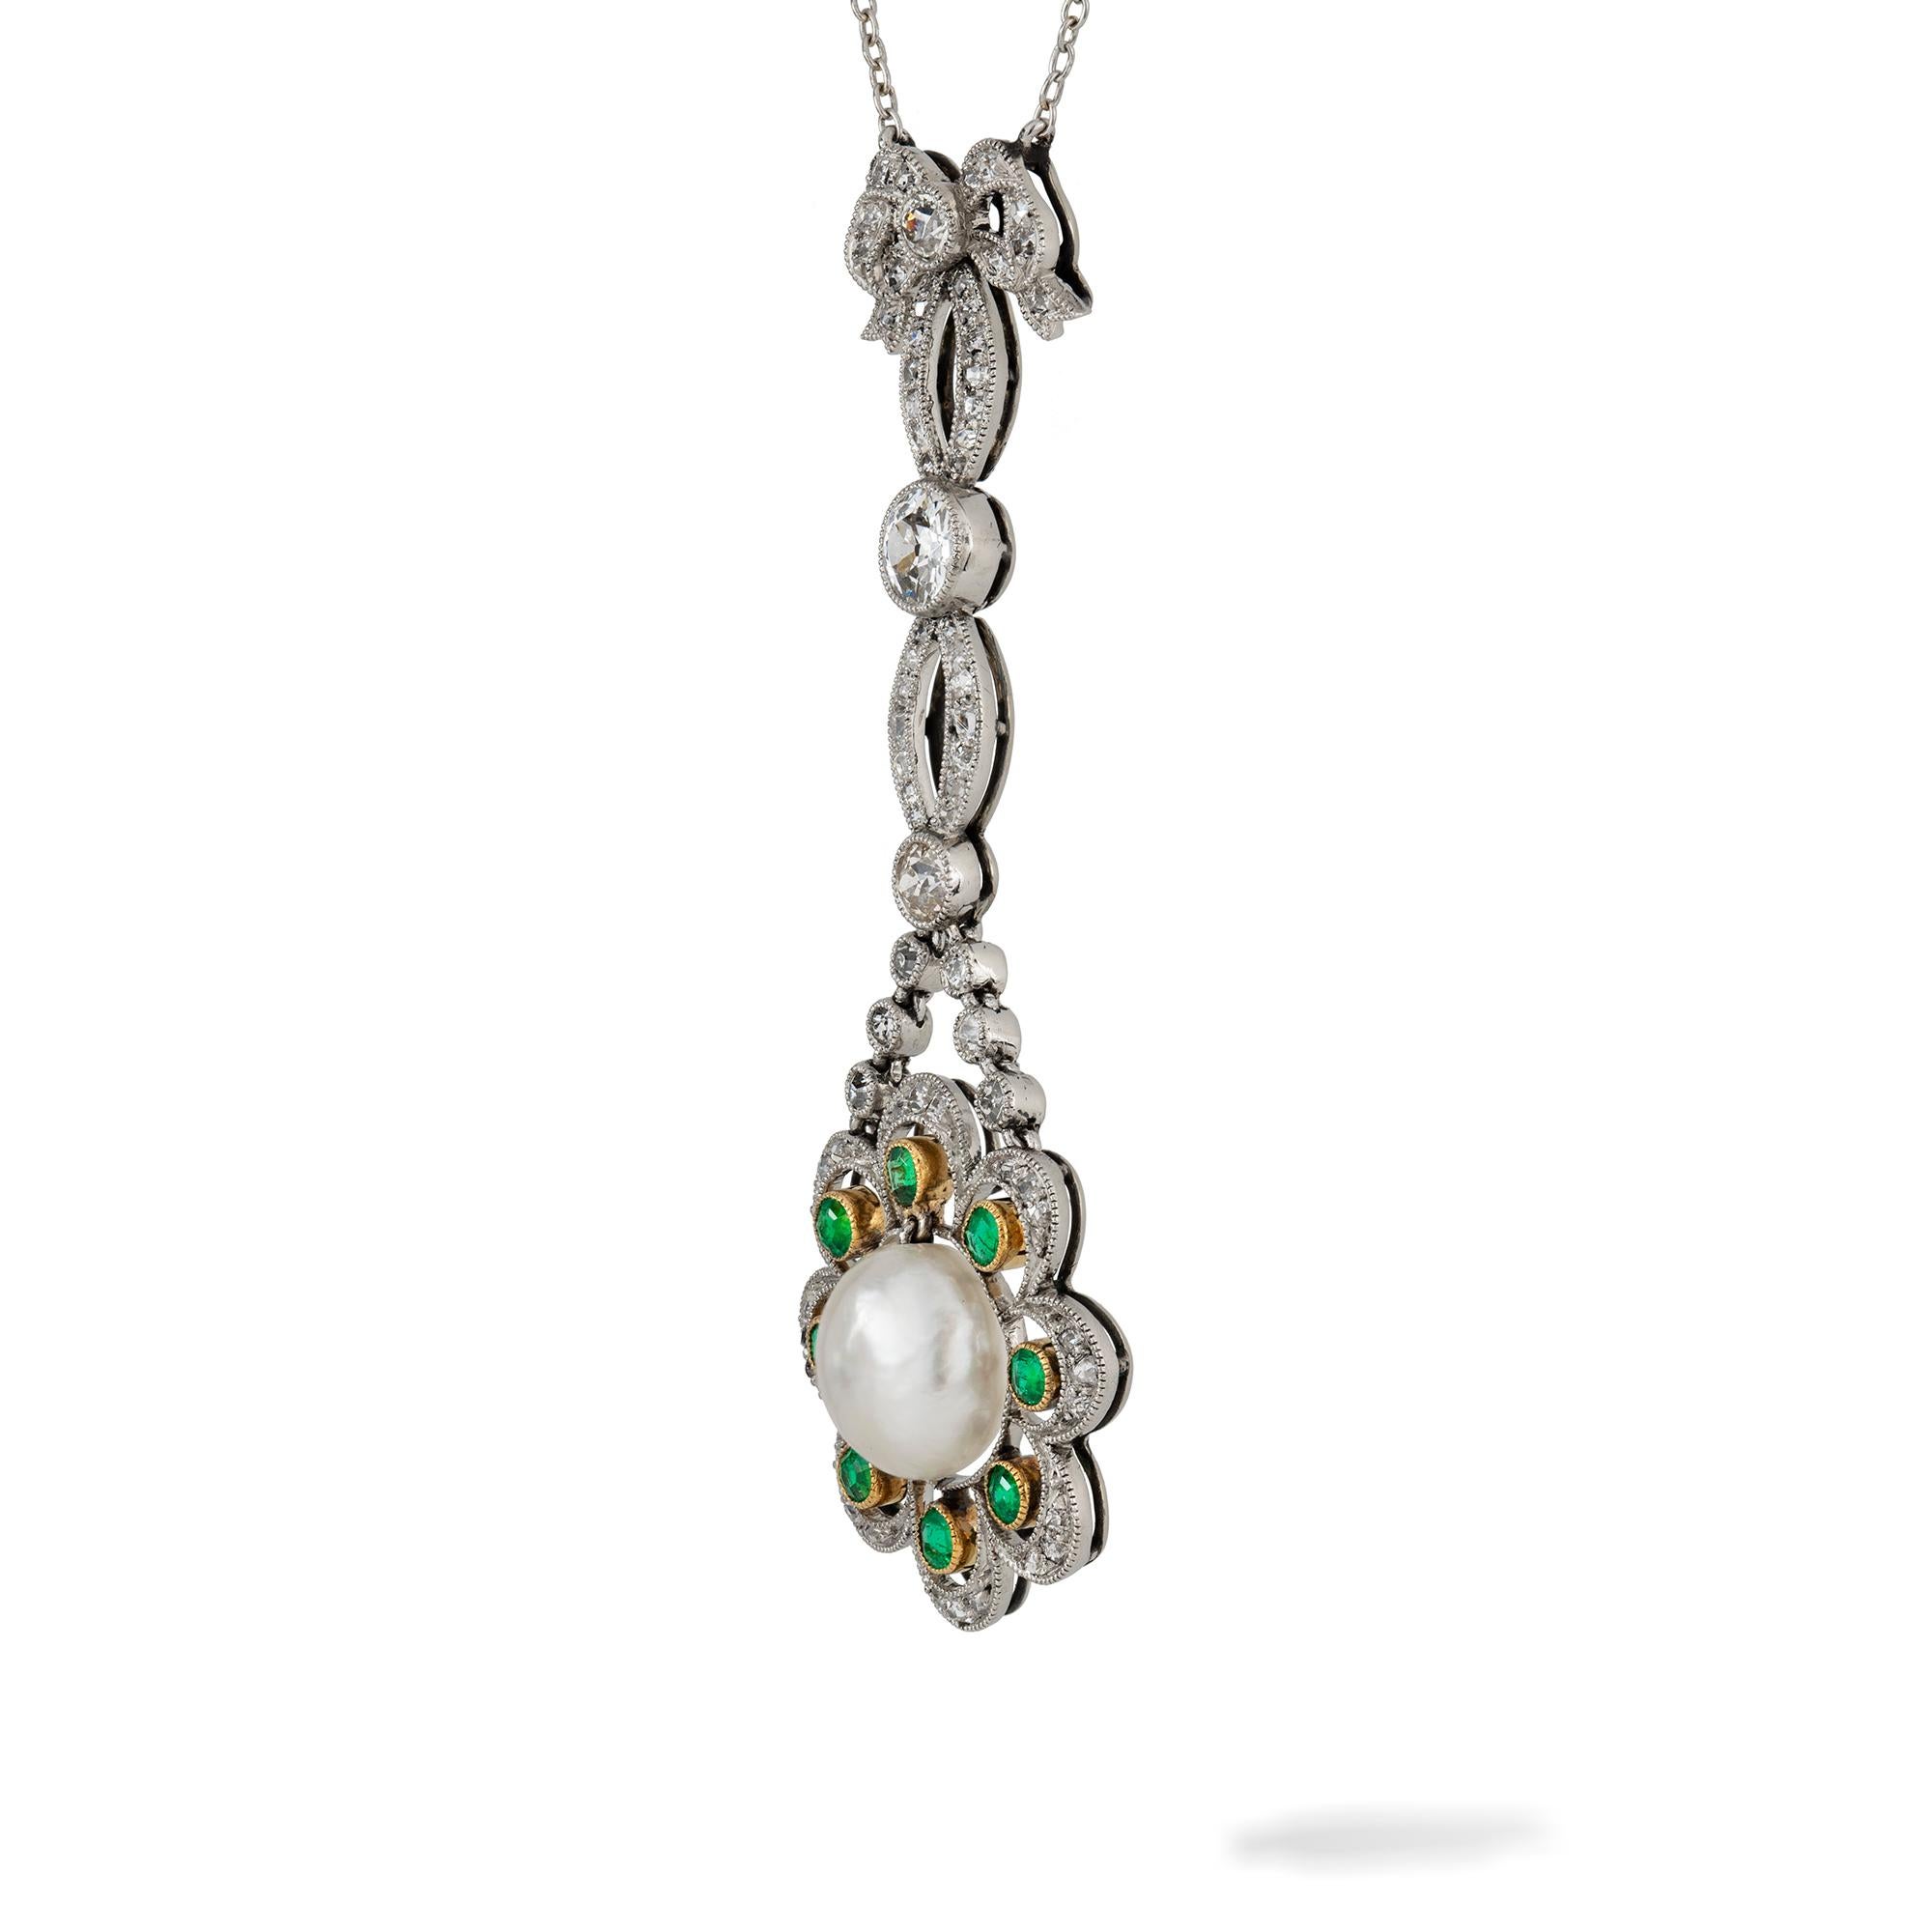 An Edwardian natural pearl, diamond and emerald pendant, to the centre a pearl accompanied by GCS Report stating to be natural of Saltwater origin, within a diamond and emerald encrusted cluster of openwork scalloped-sedge design, suspended by a